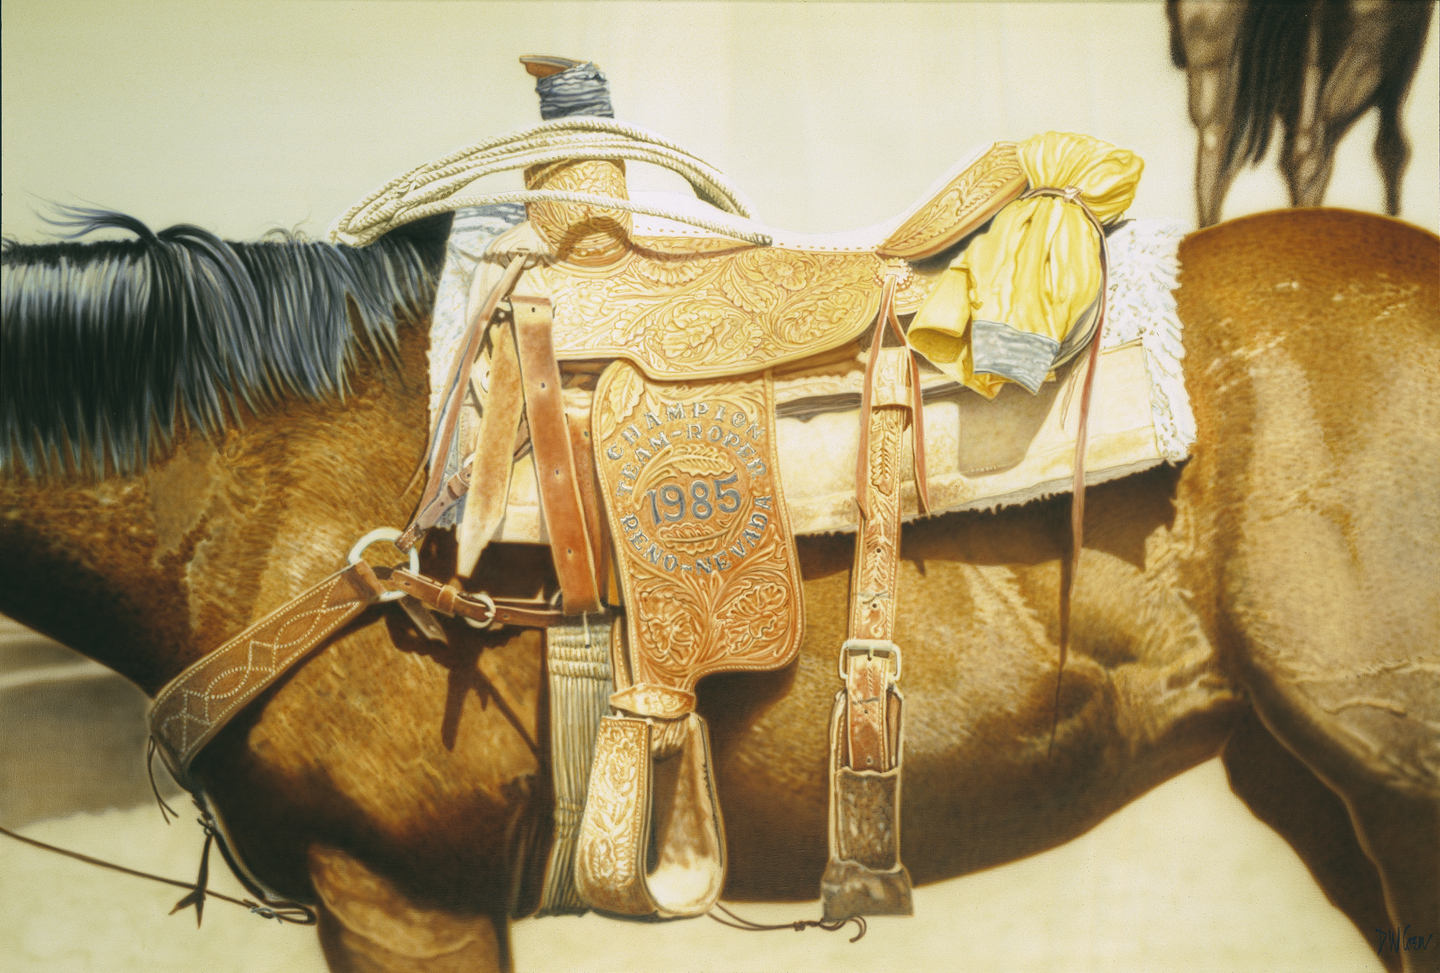 Rolled up yellow rain jacket tied to the back of a saddle on a horse.